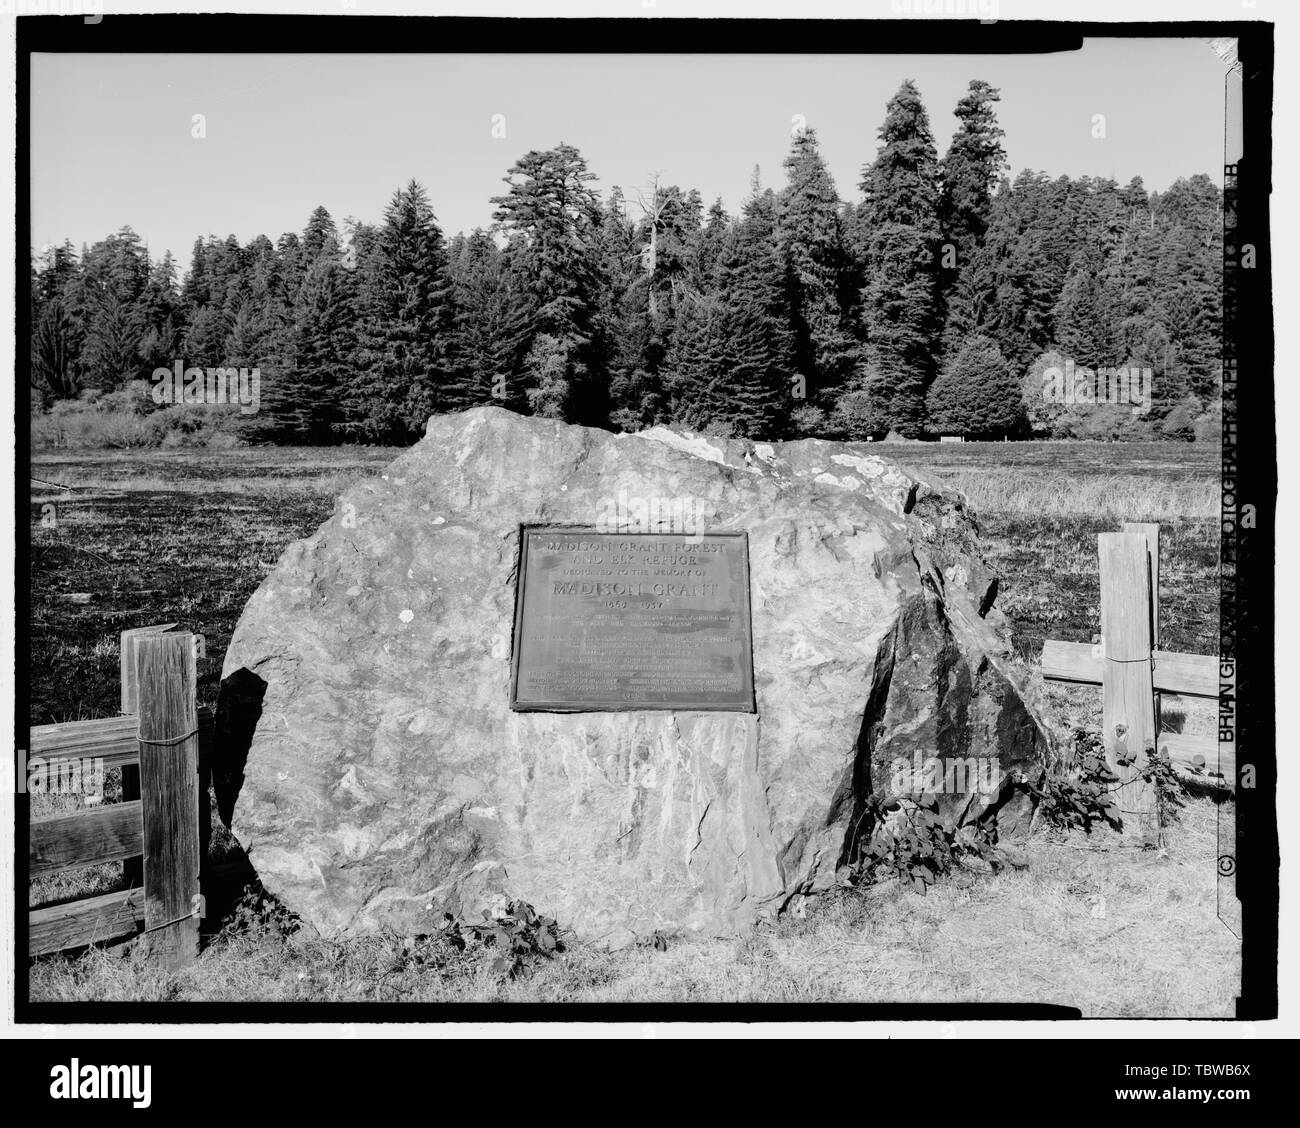 MADISON GRANT TABLET AT PRAIRIE CREEK STATE PARK. HUMBOLDT COUNTY, CALIFORNIA. LOOKING W.  Redwood National and State Parks Roads, California coast from Crescent City to Trinidad, Crescent City, Del Norte County, CA Stock Photo